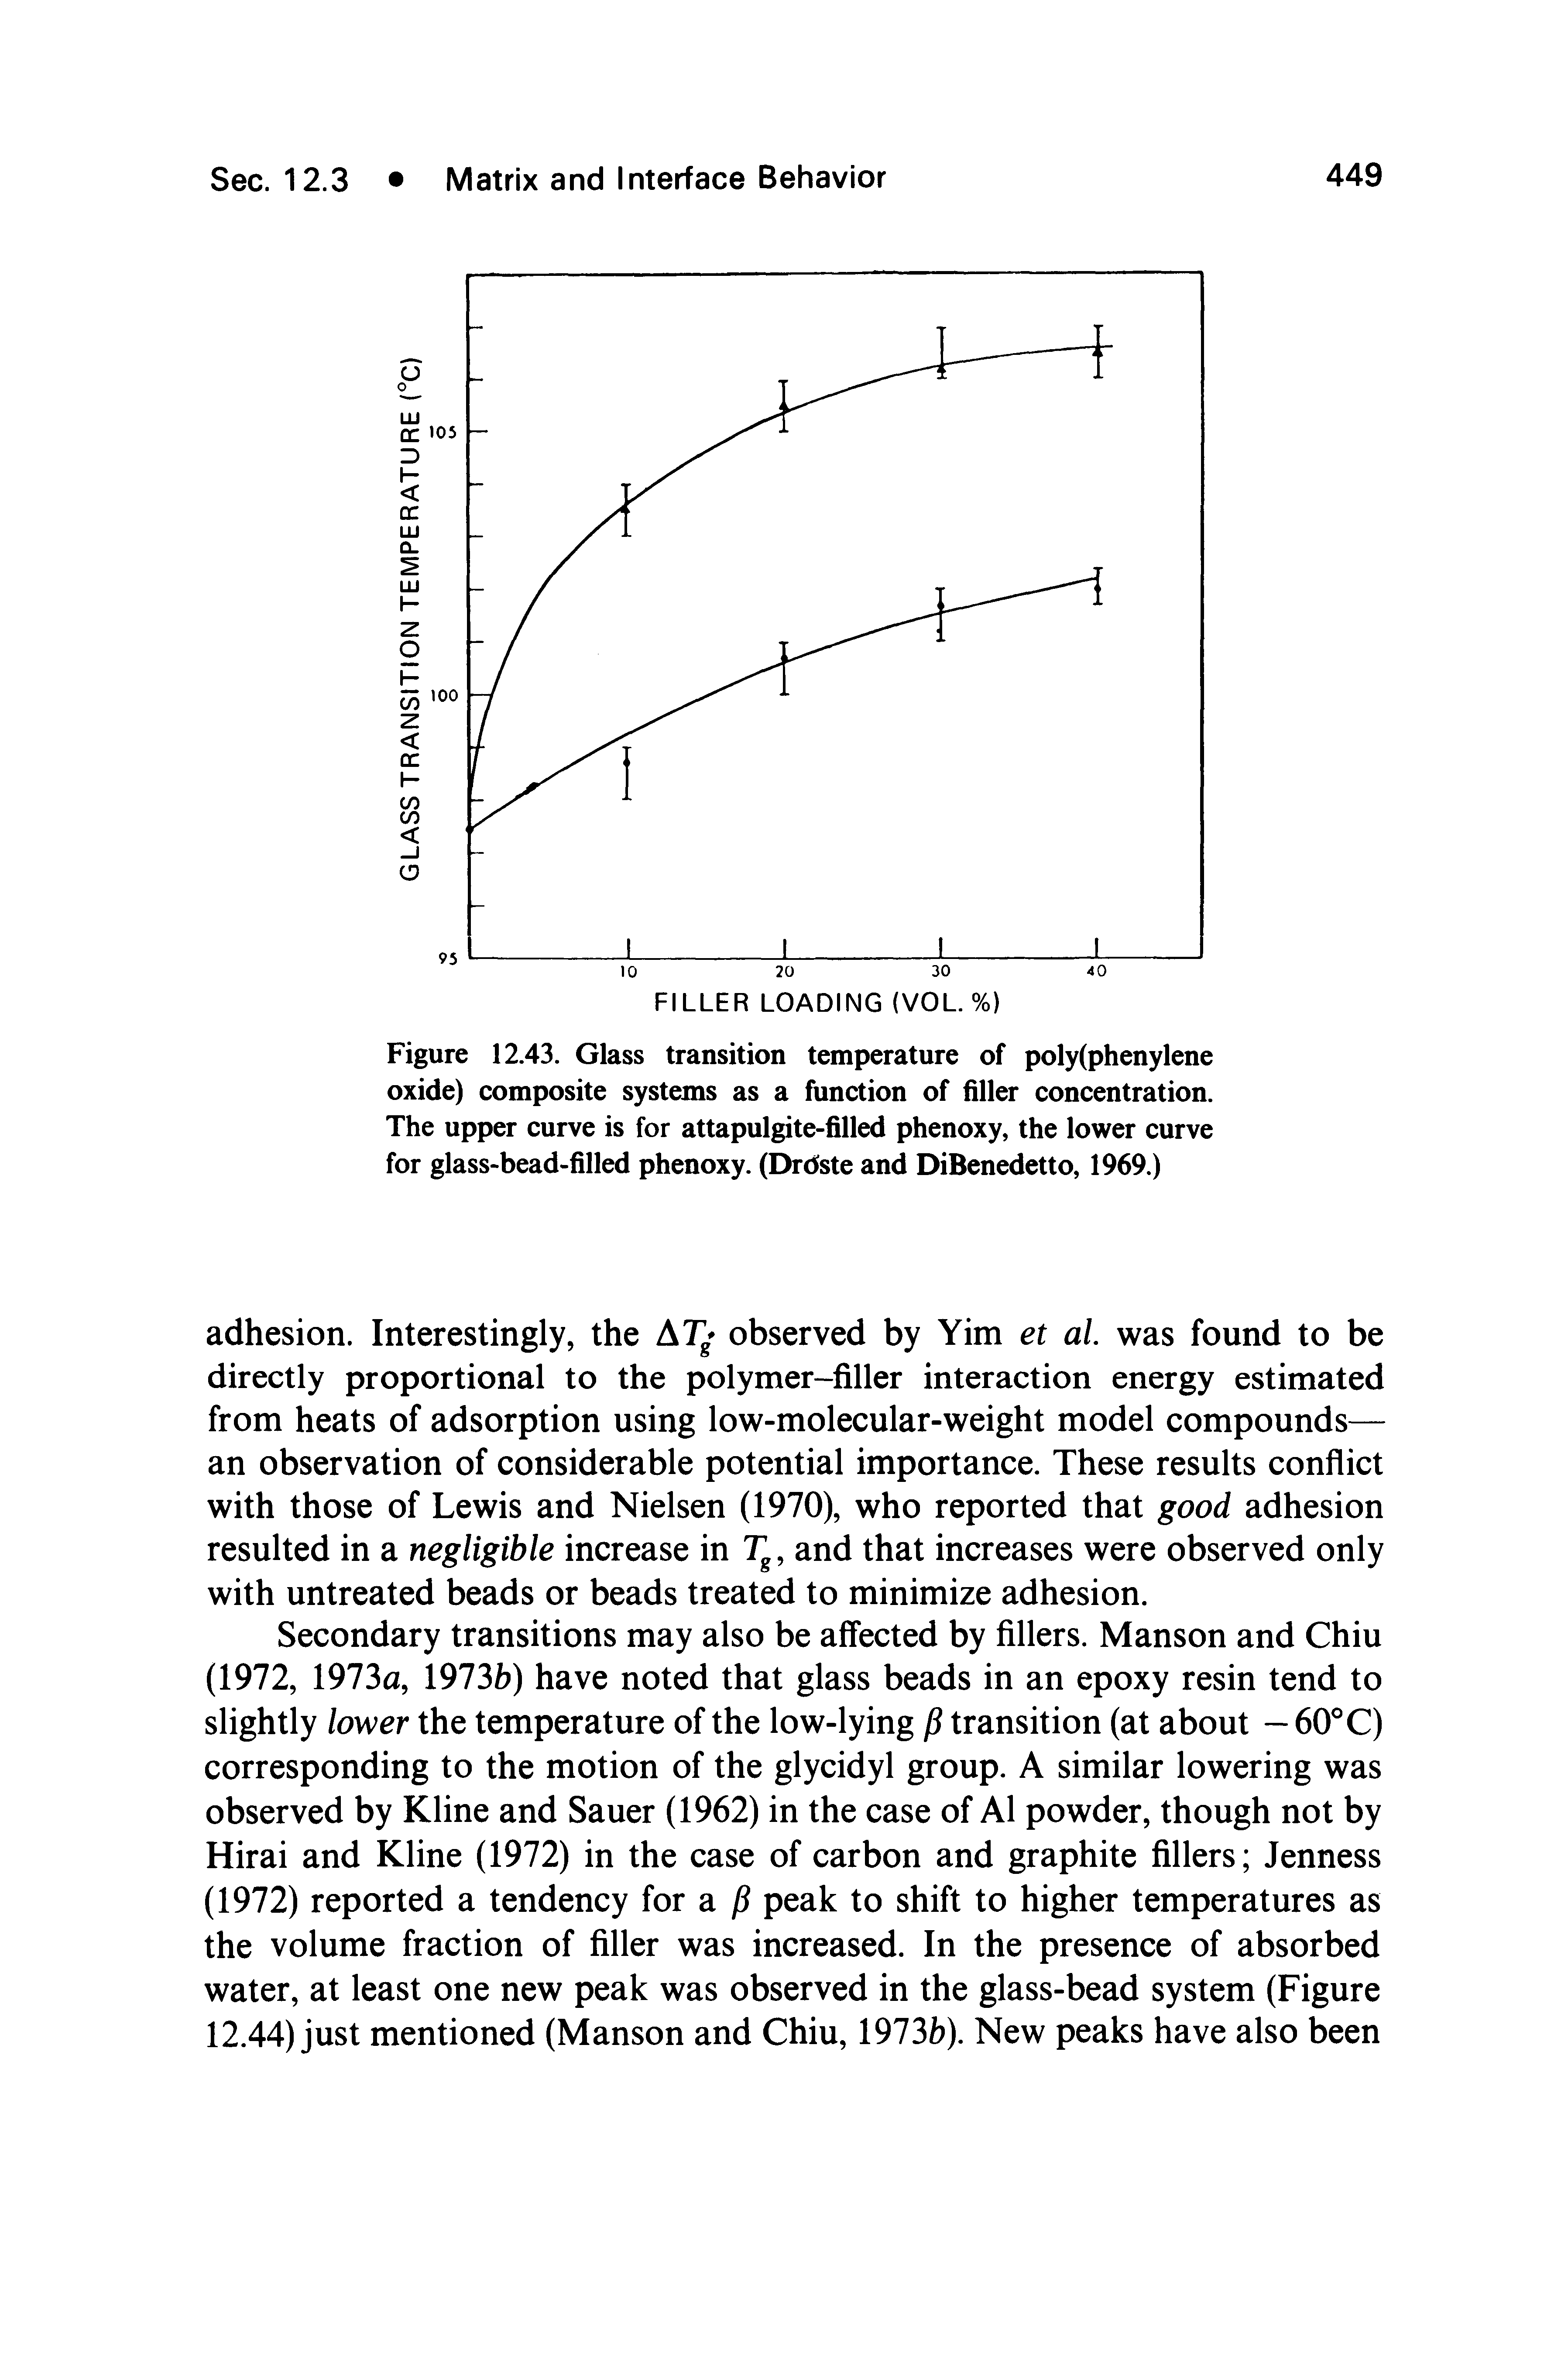 Figure 12.43. Glass transition temperature of poly(phenylene oxide) composite systems as a function of filler concentration. The upper curve is for attapulgite-filled phenoxy, the lower curve for glass-bead-filled phenoxy. (Drdste and DiBenedetto, 1969.)...